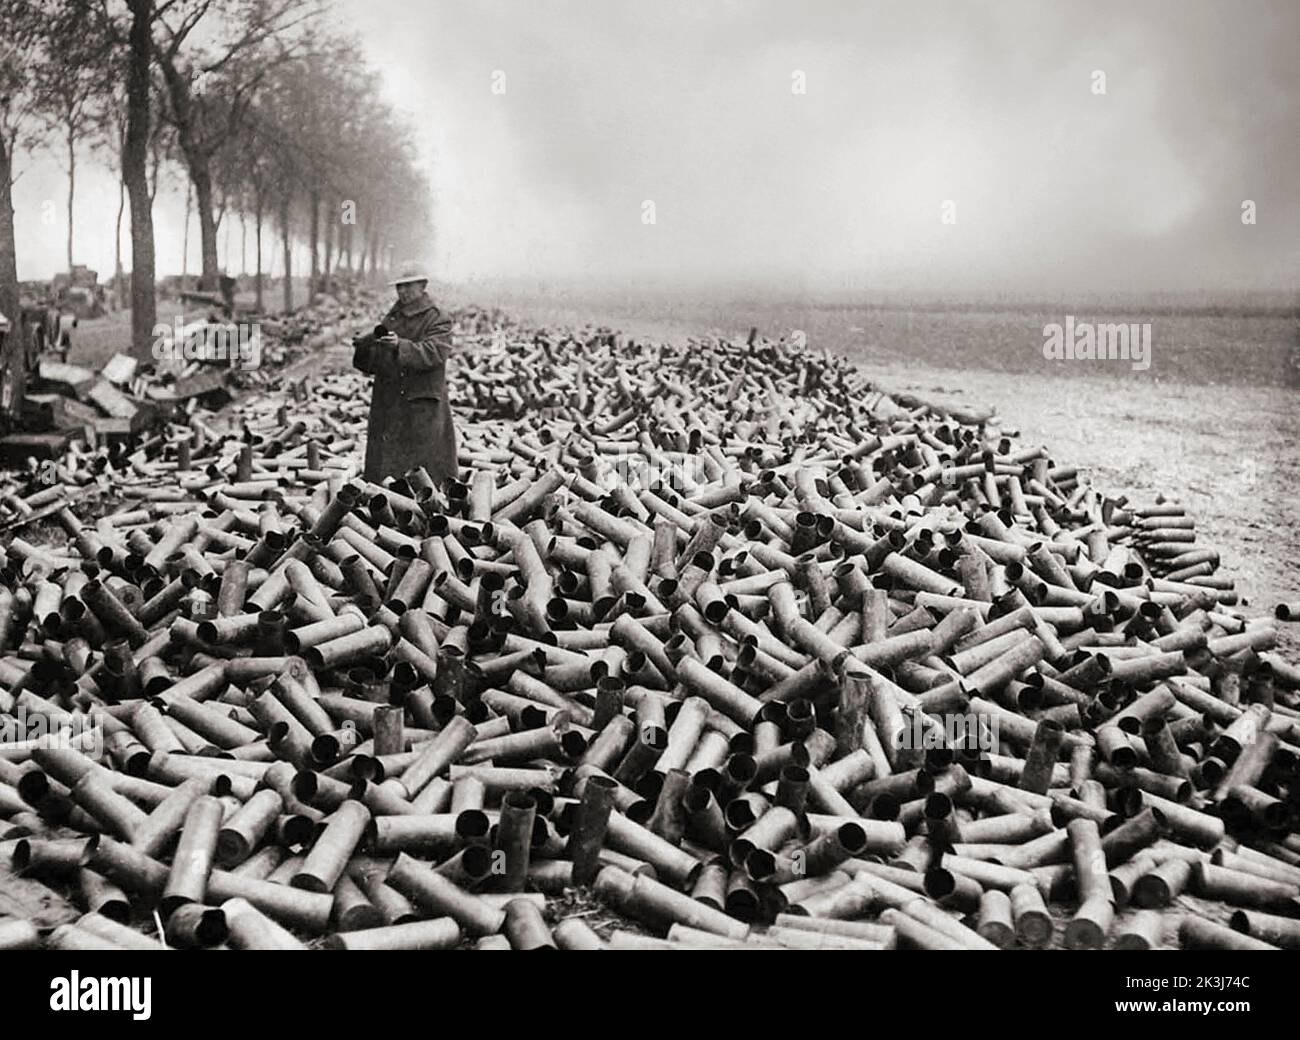 Masses of shell cases on a French roadside near the front lines, the contents of which had been fired into the German lines. Officially the British fired around 175 million rounds throughout the war, likewise the French, Germans and Austrians matching the number. Collectively it's estimated about a billion rounds were fired during the war. Stock Photo